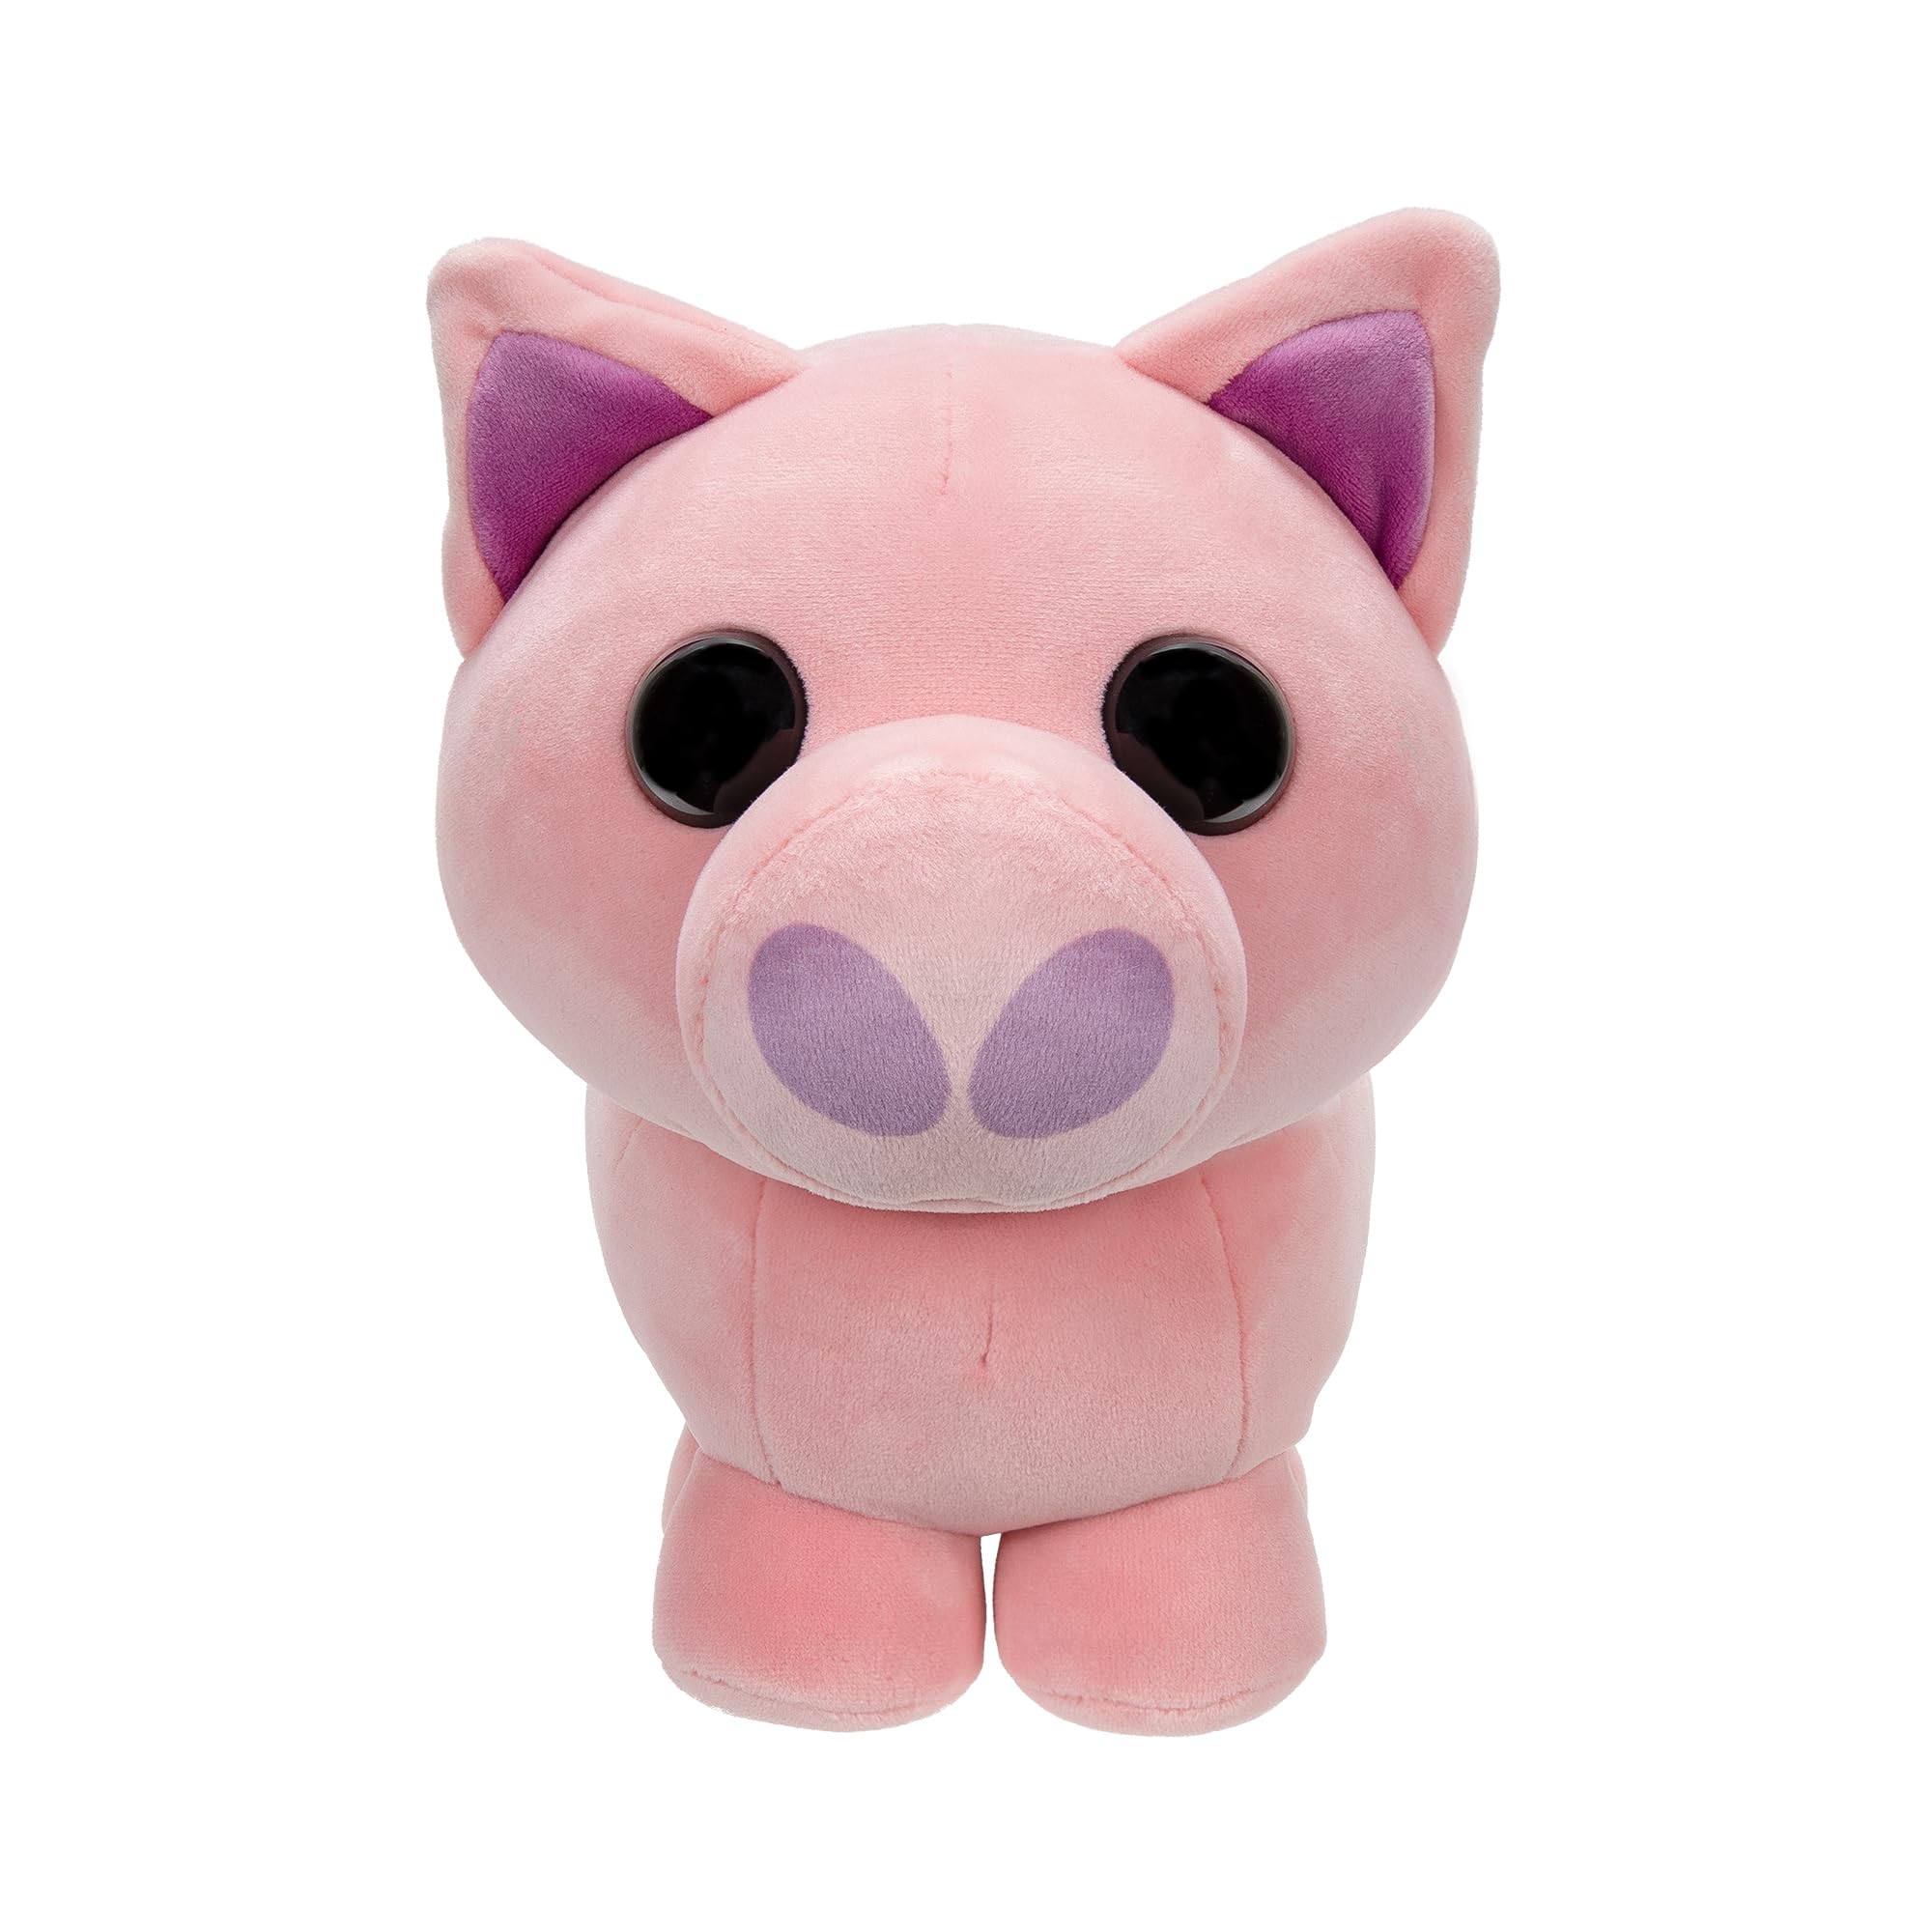 Adopt Me! PIG Series 3 Rare In-Game Stylization Collector Soft Plush Toy